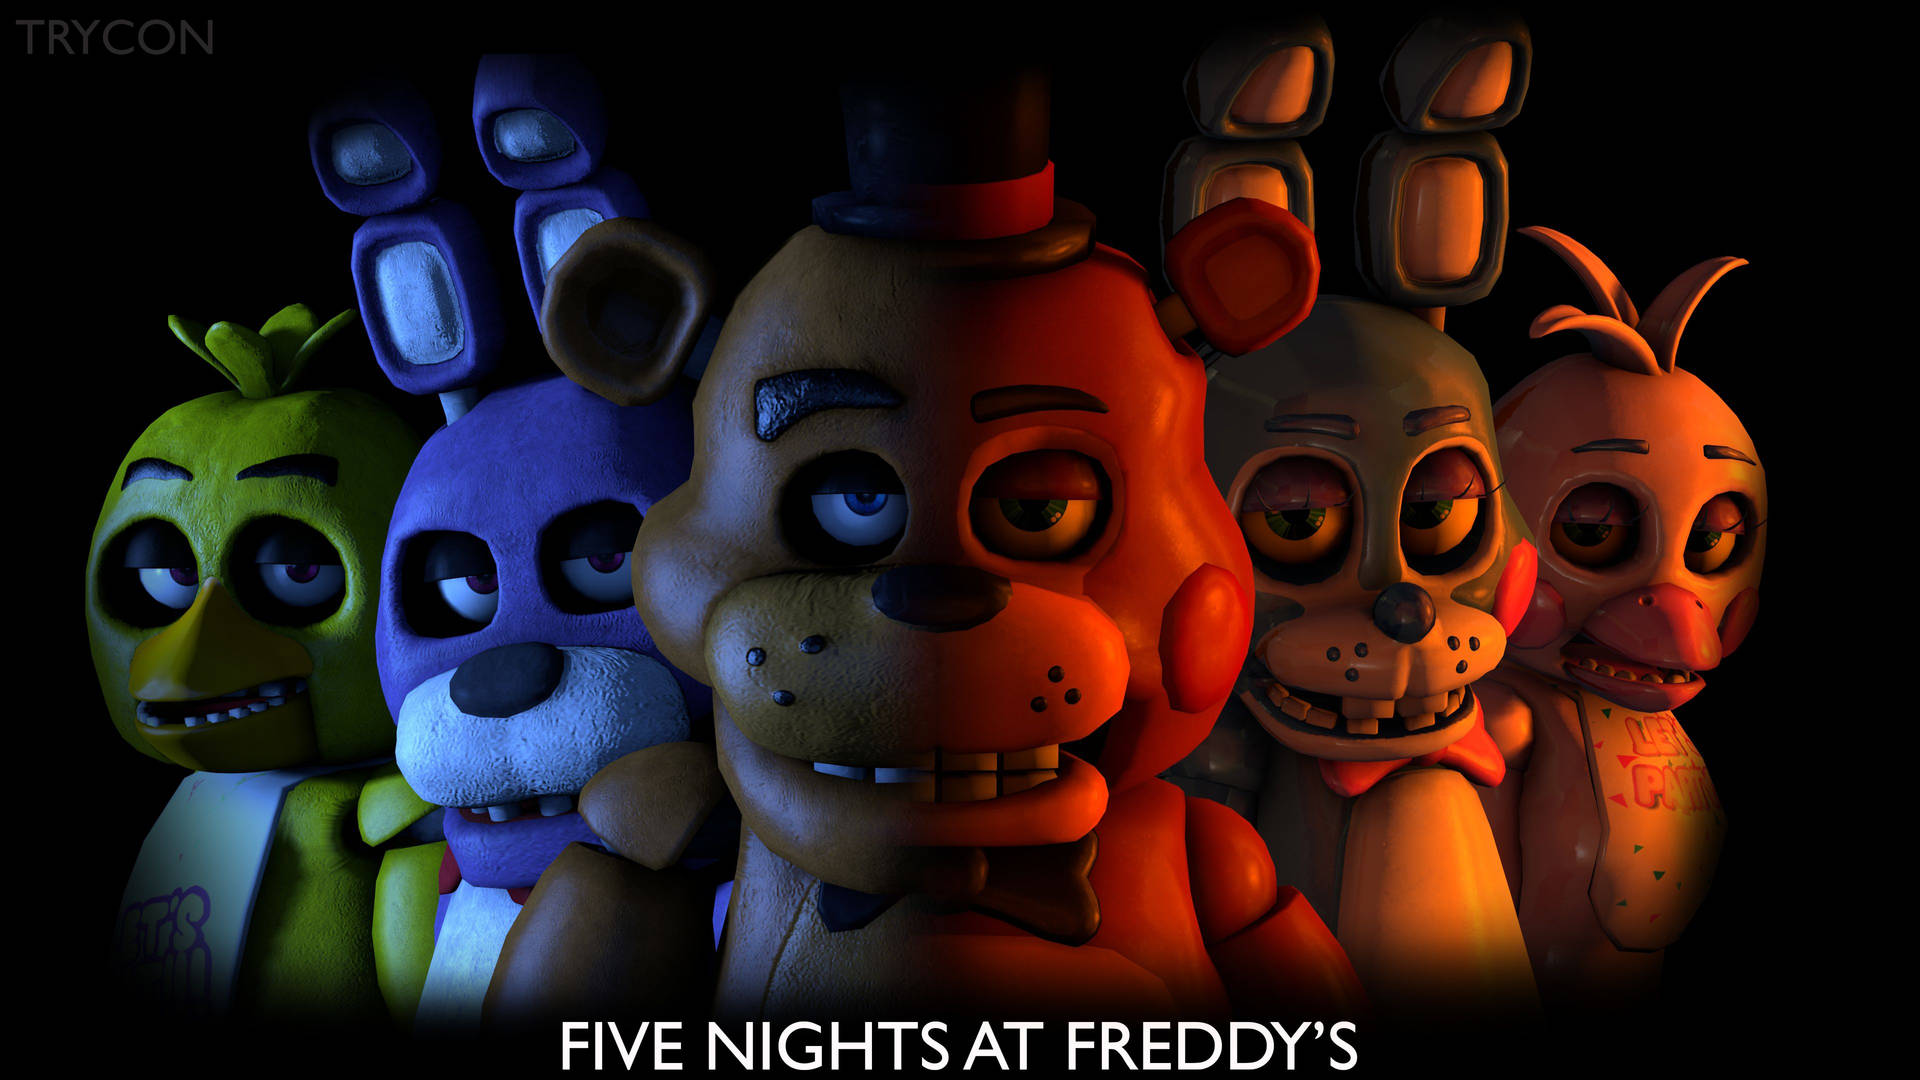 Creative Artwork Of Fnaf Classic And Toy